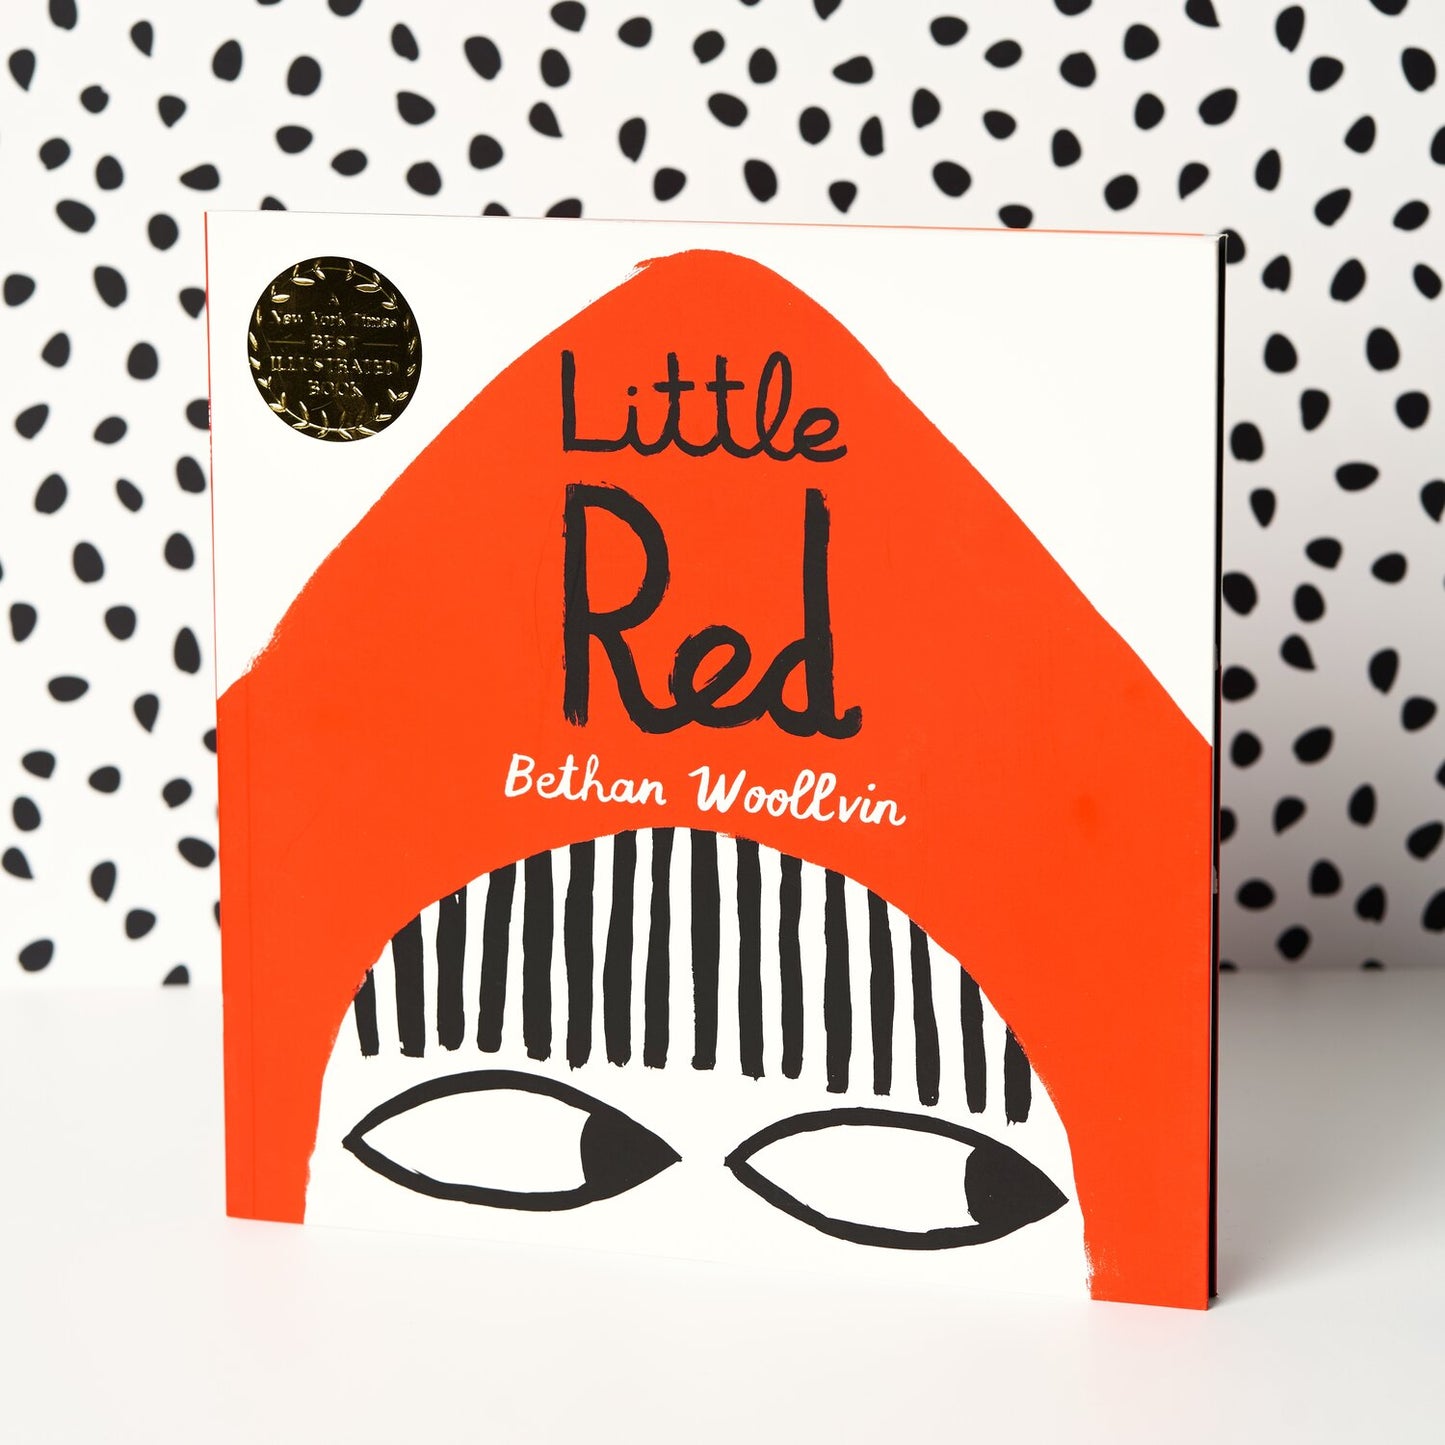 Little Red, Book